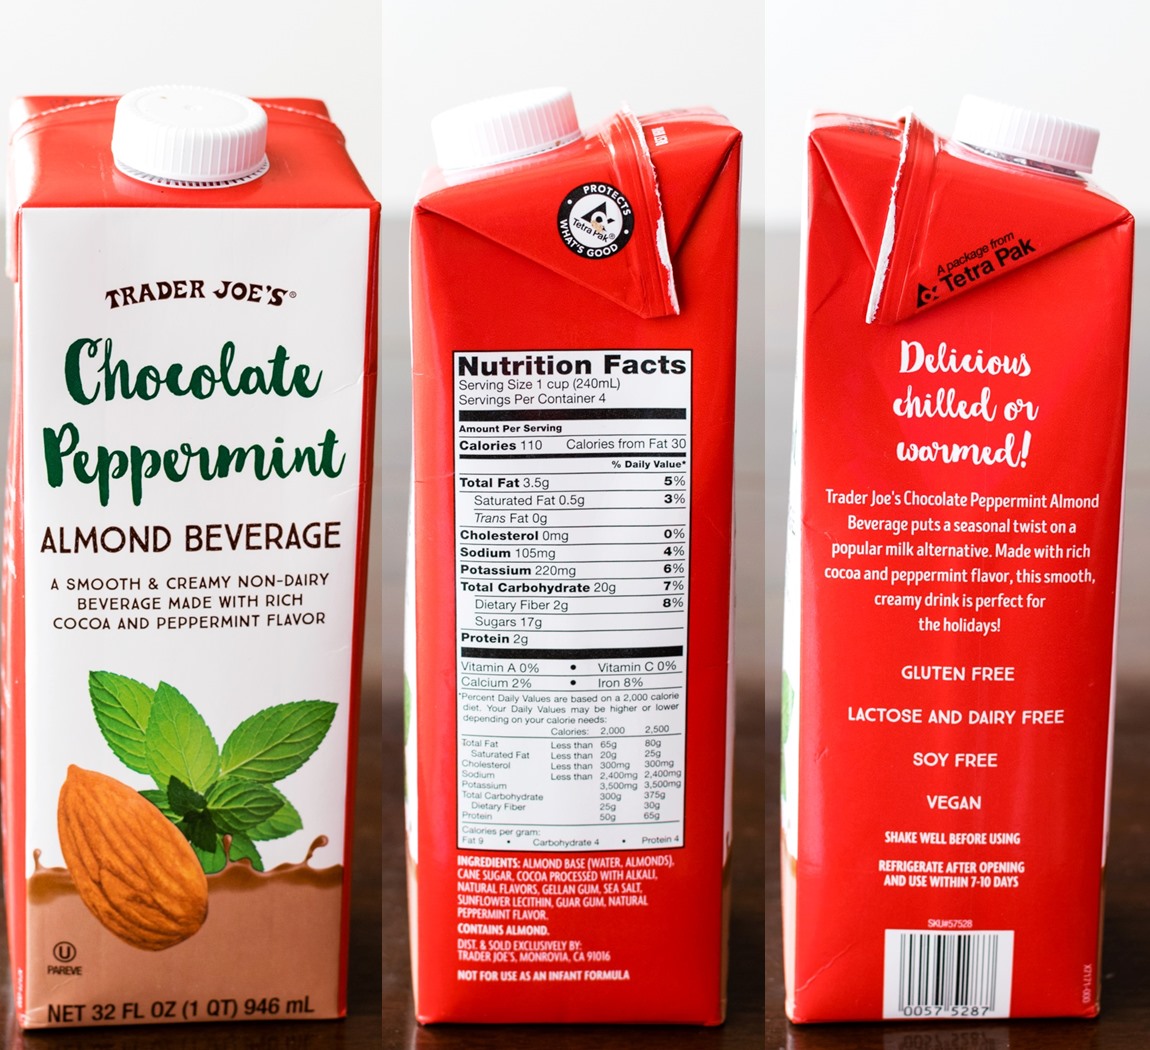 Trader Joe's Holiday Almond Beverages Review - Dairy-Free Chocolate Peppermint pictured